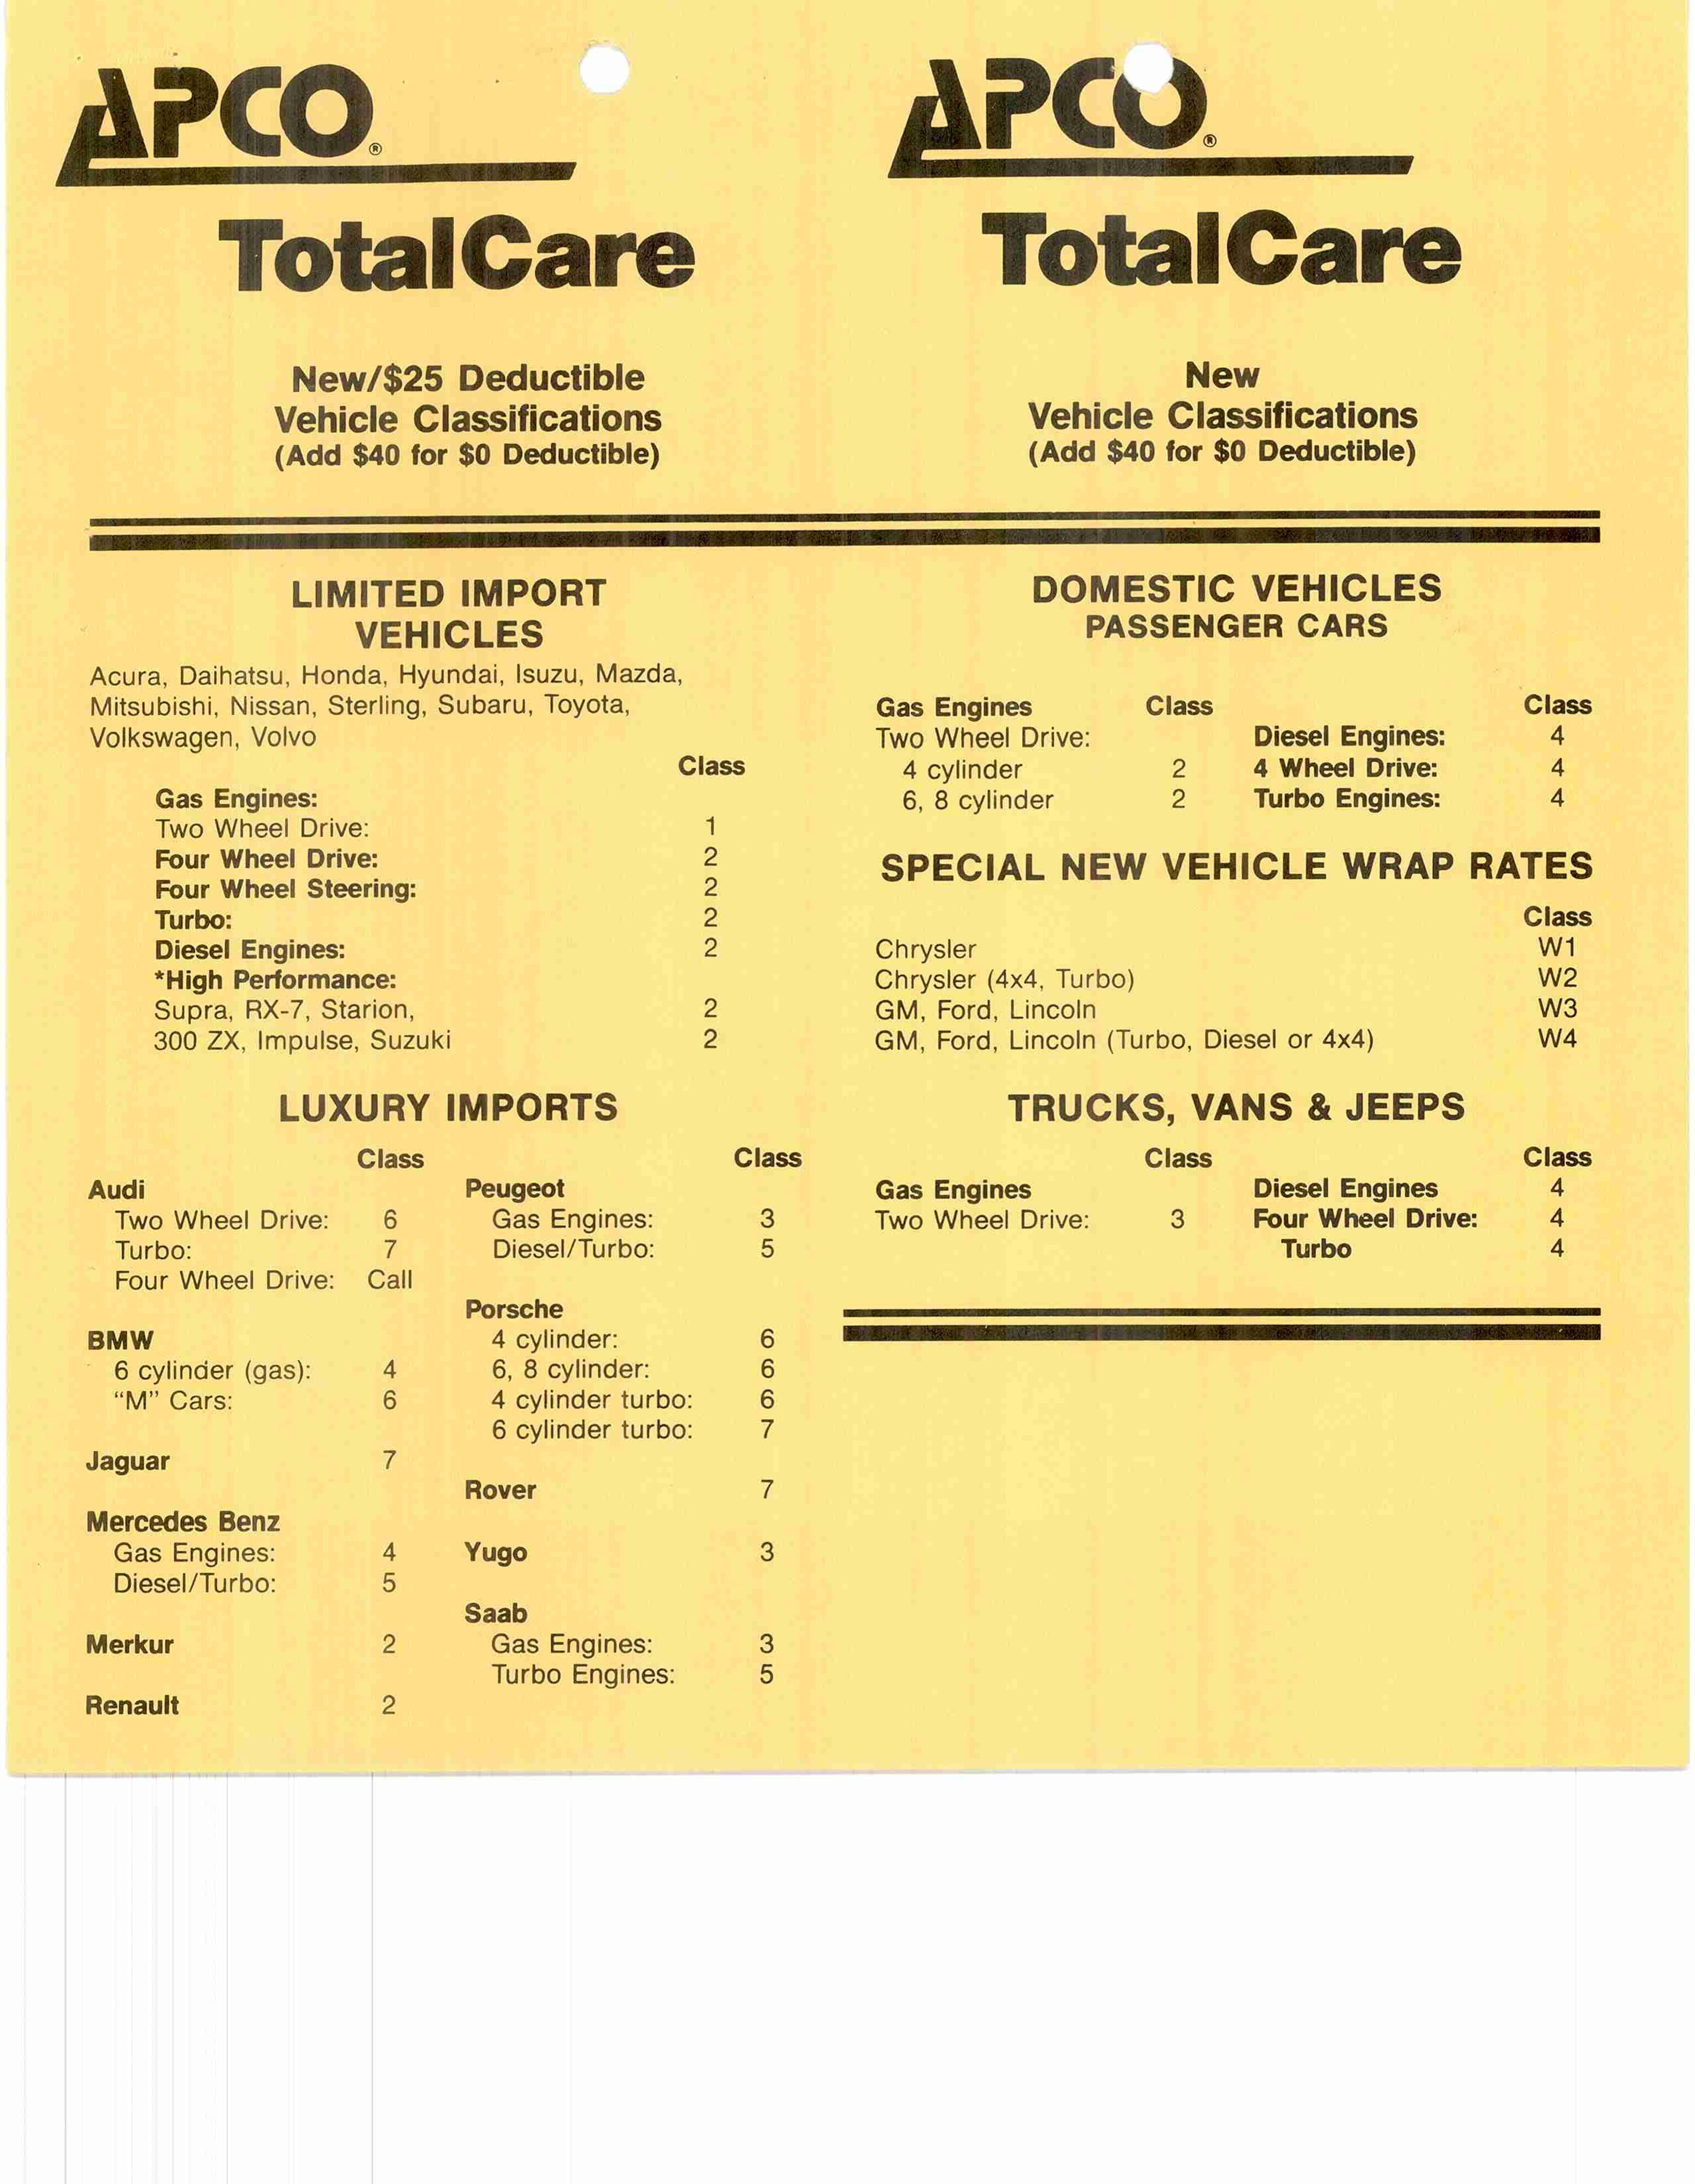  TOTAL CARE